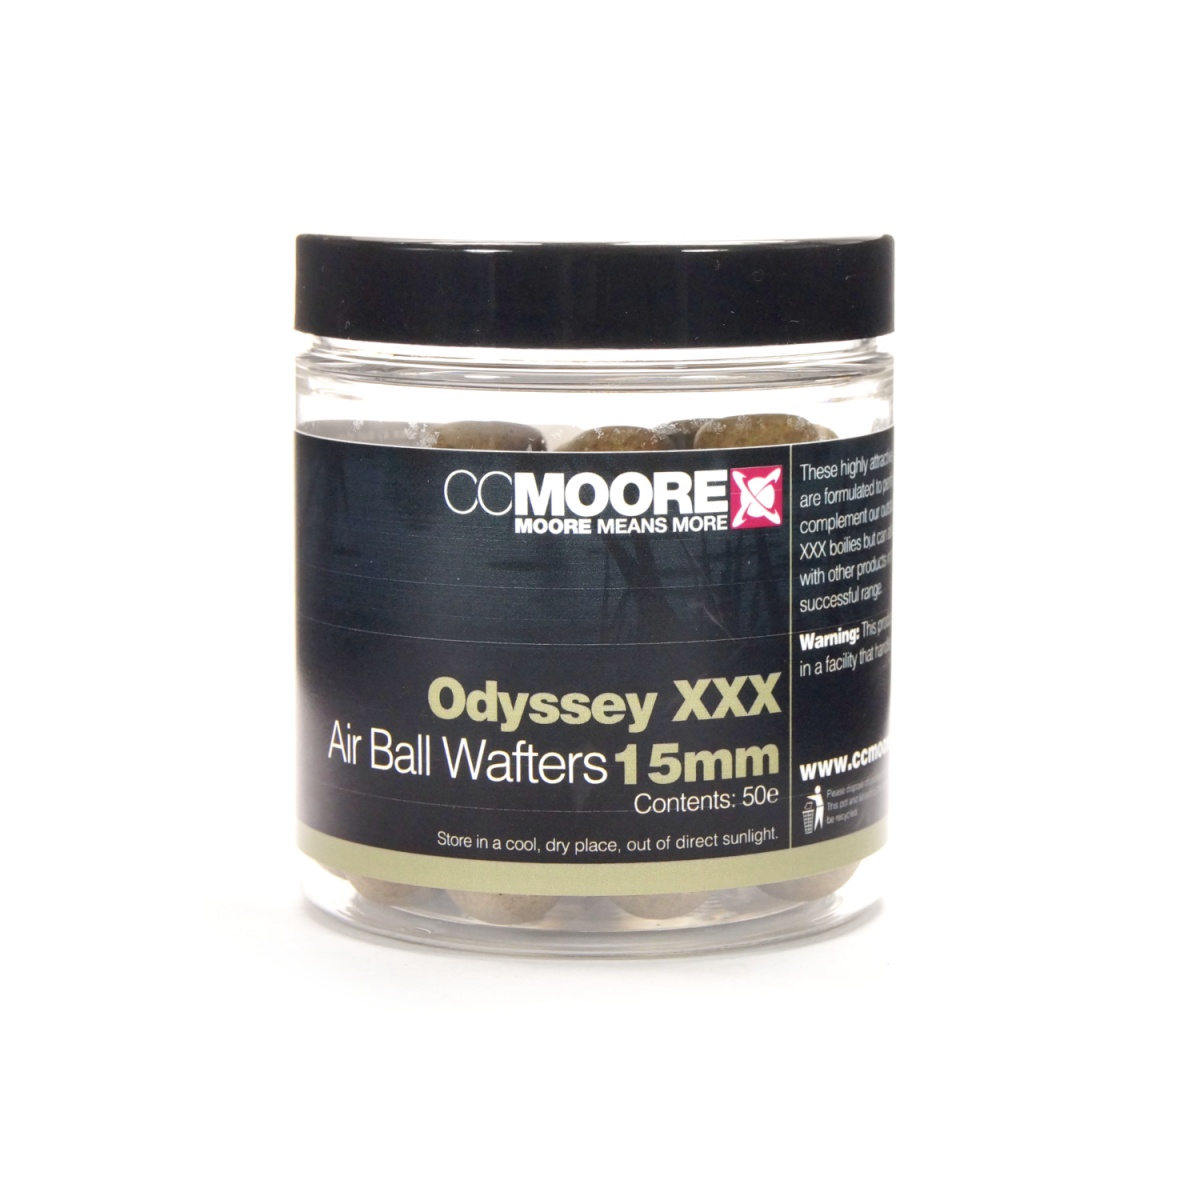 CcMoore Air Ball Wafters Odyssey XXX 15 mm rozmiar